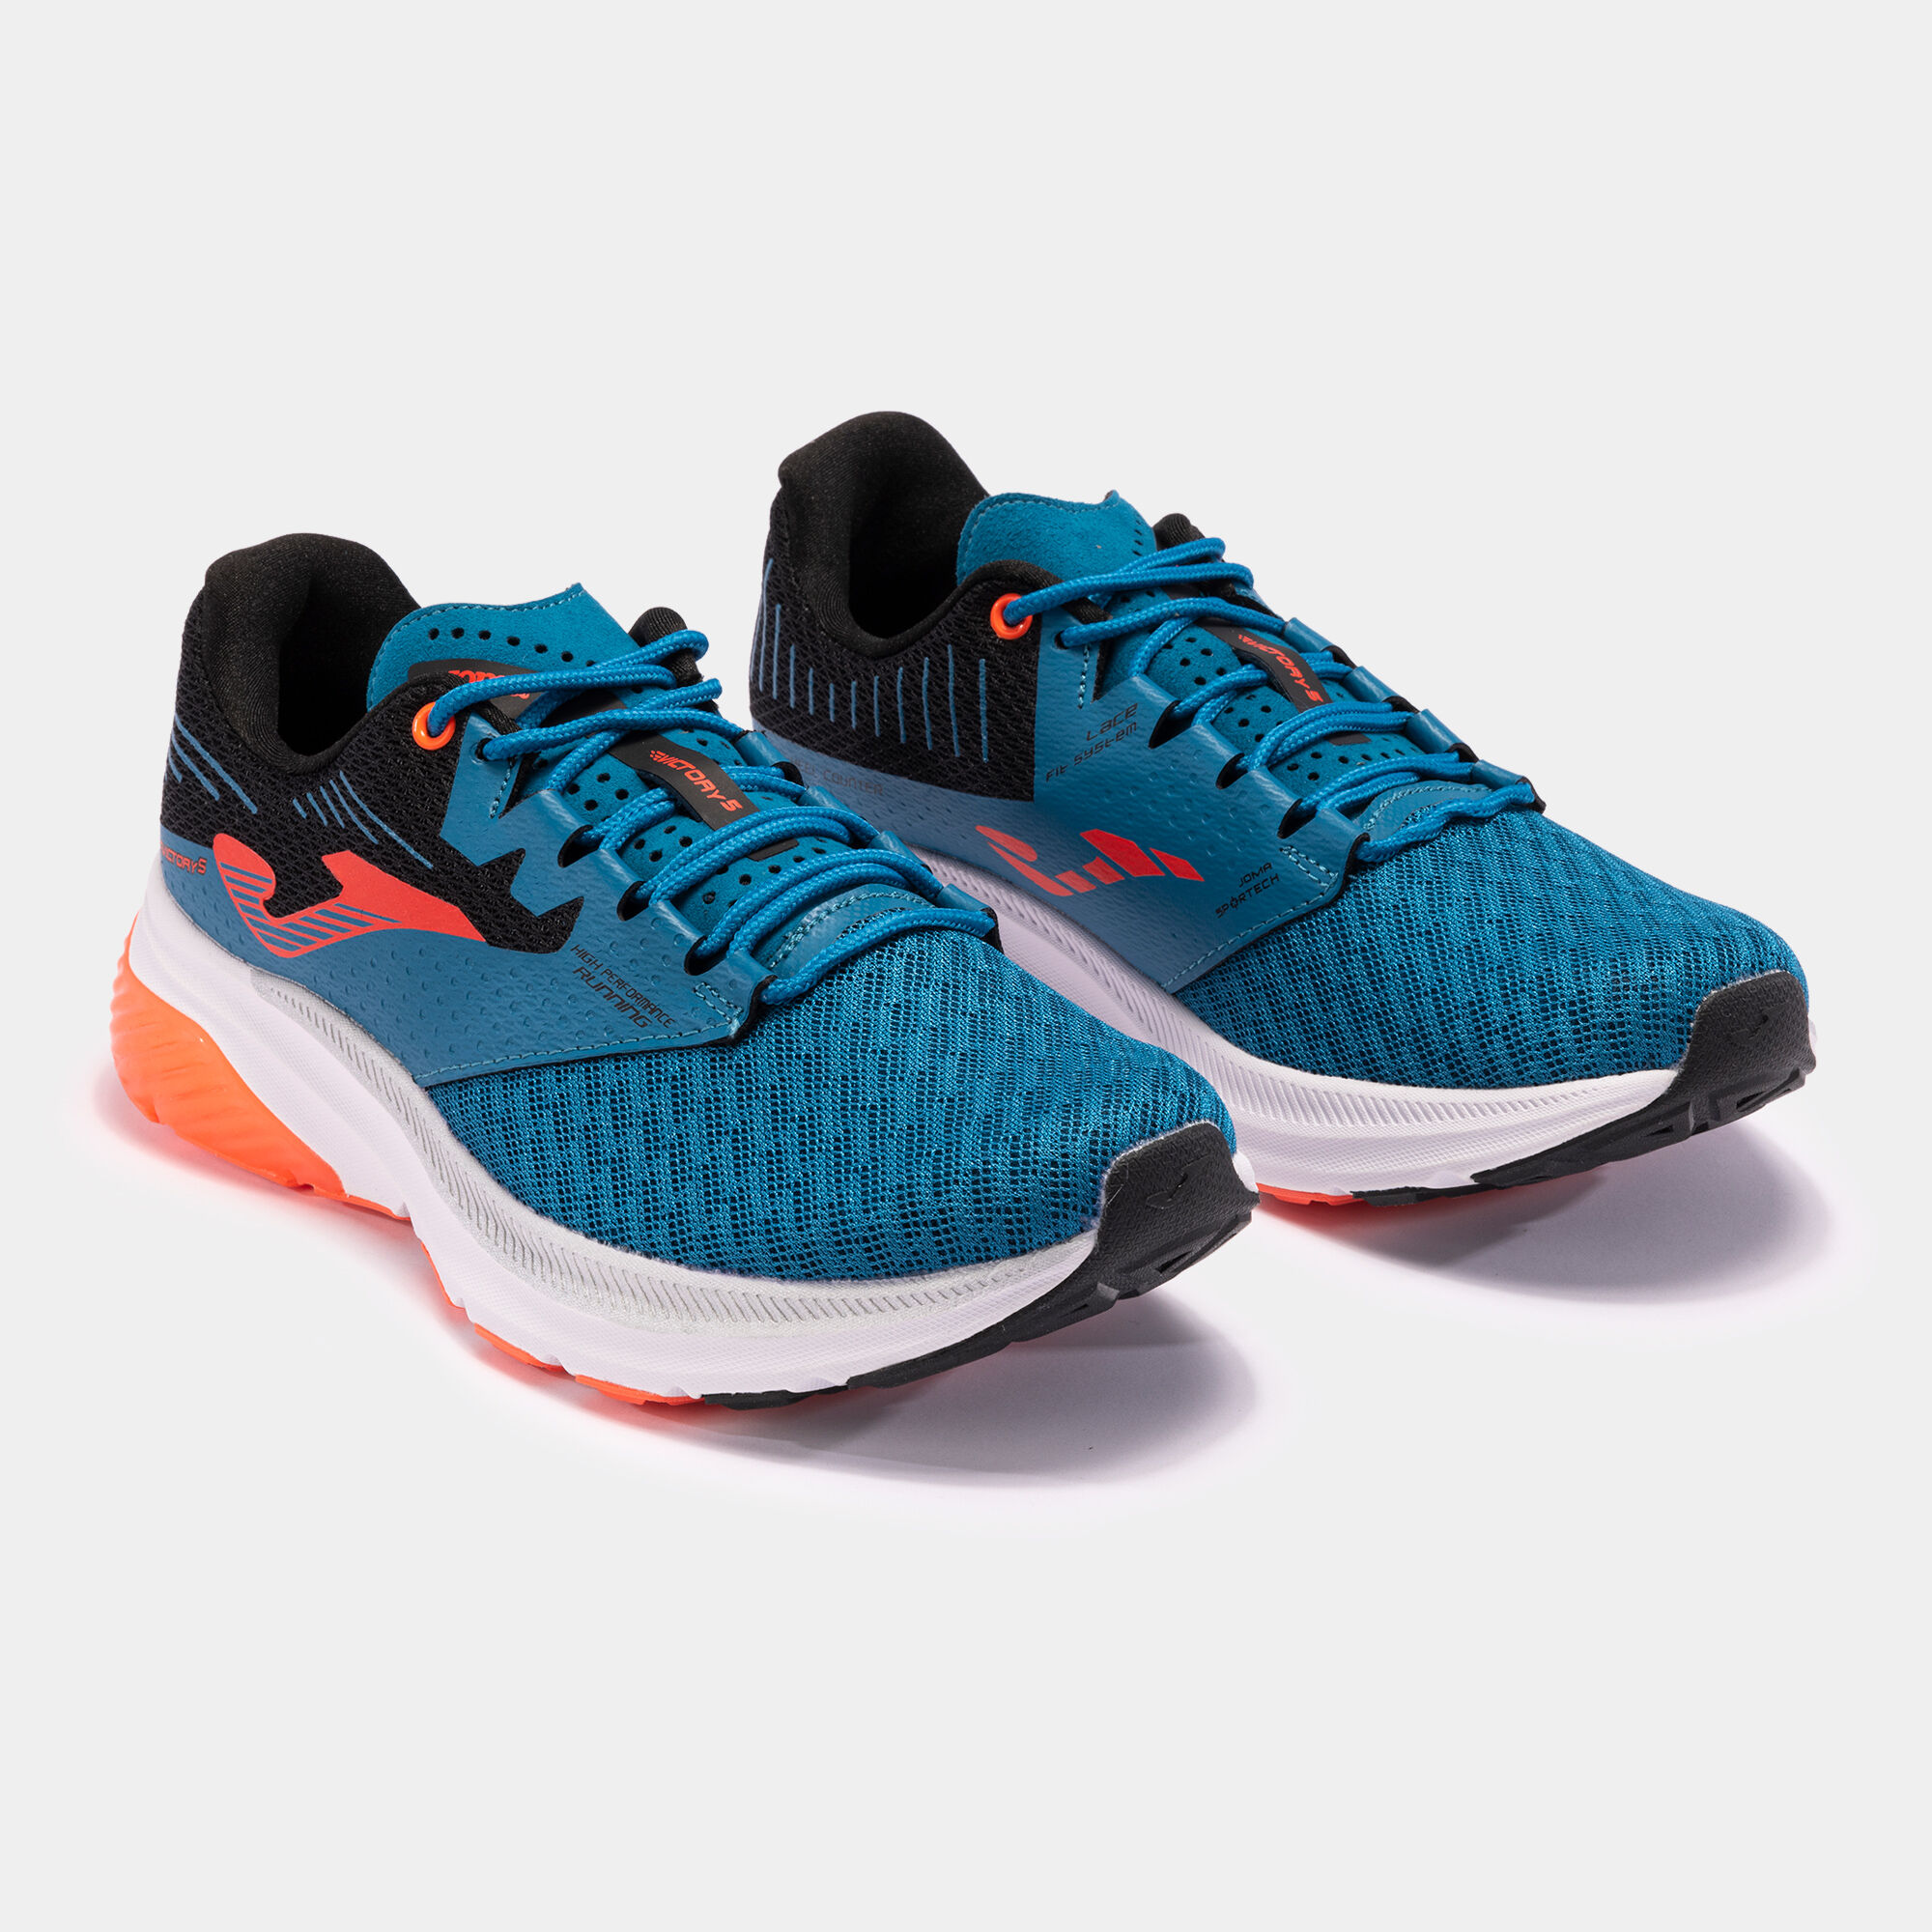 CHAUSSURES RUNNING R.VICTORY 23 HOMME BLEU PÉTROLE ROUGE